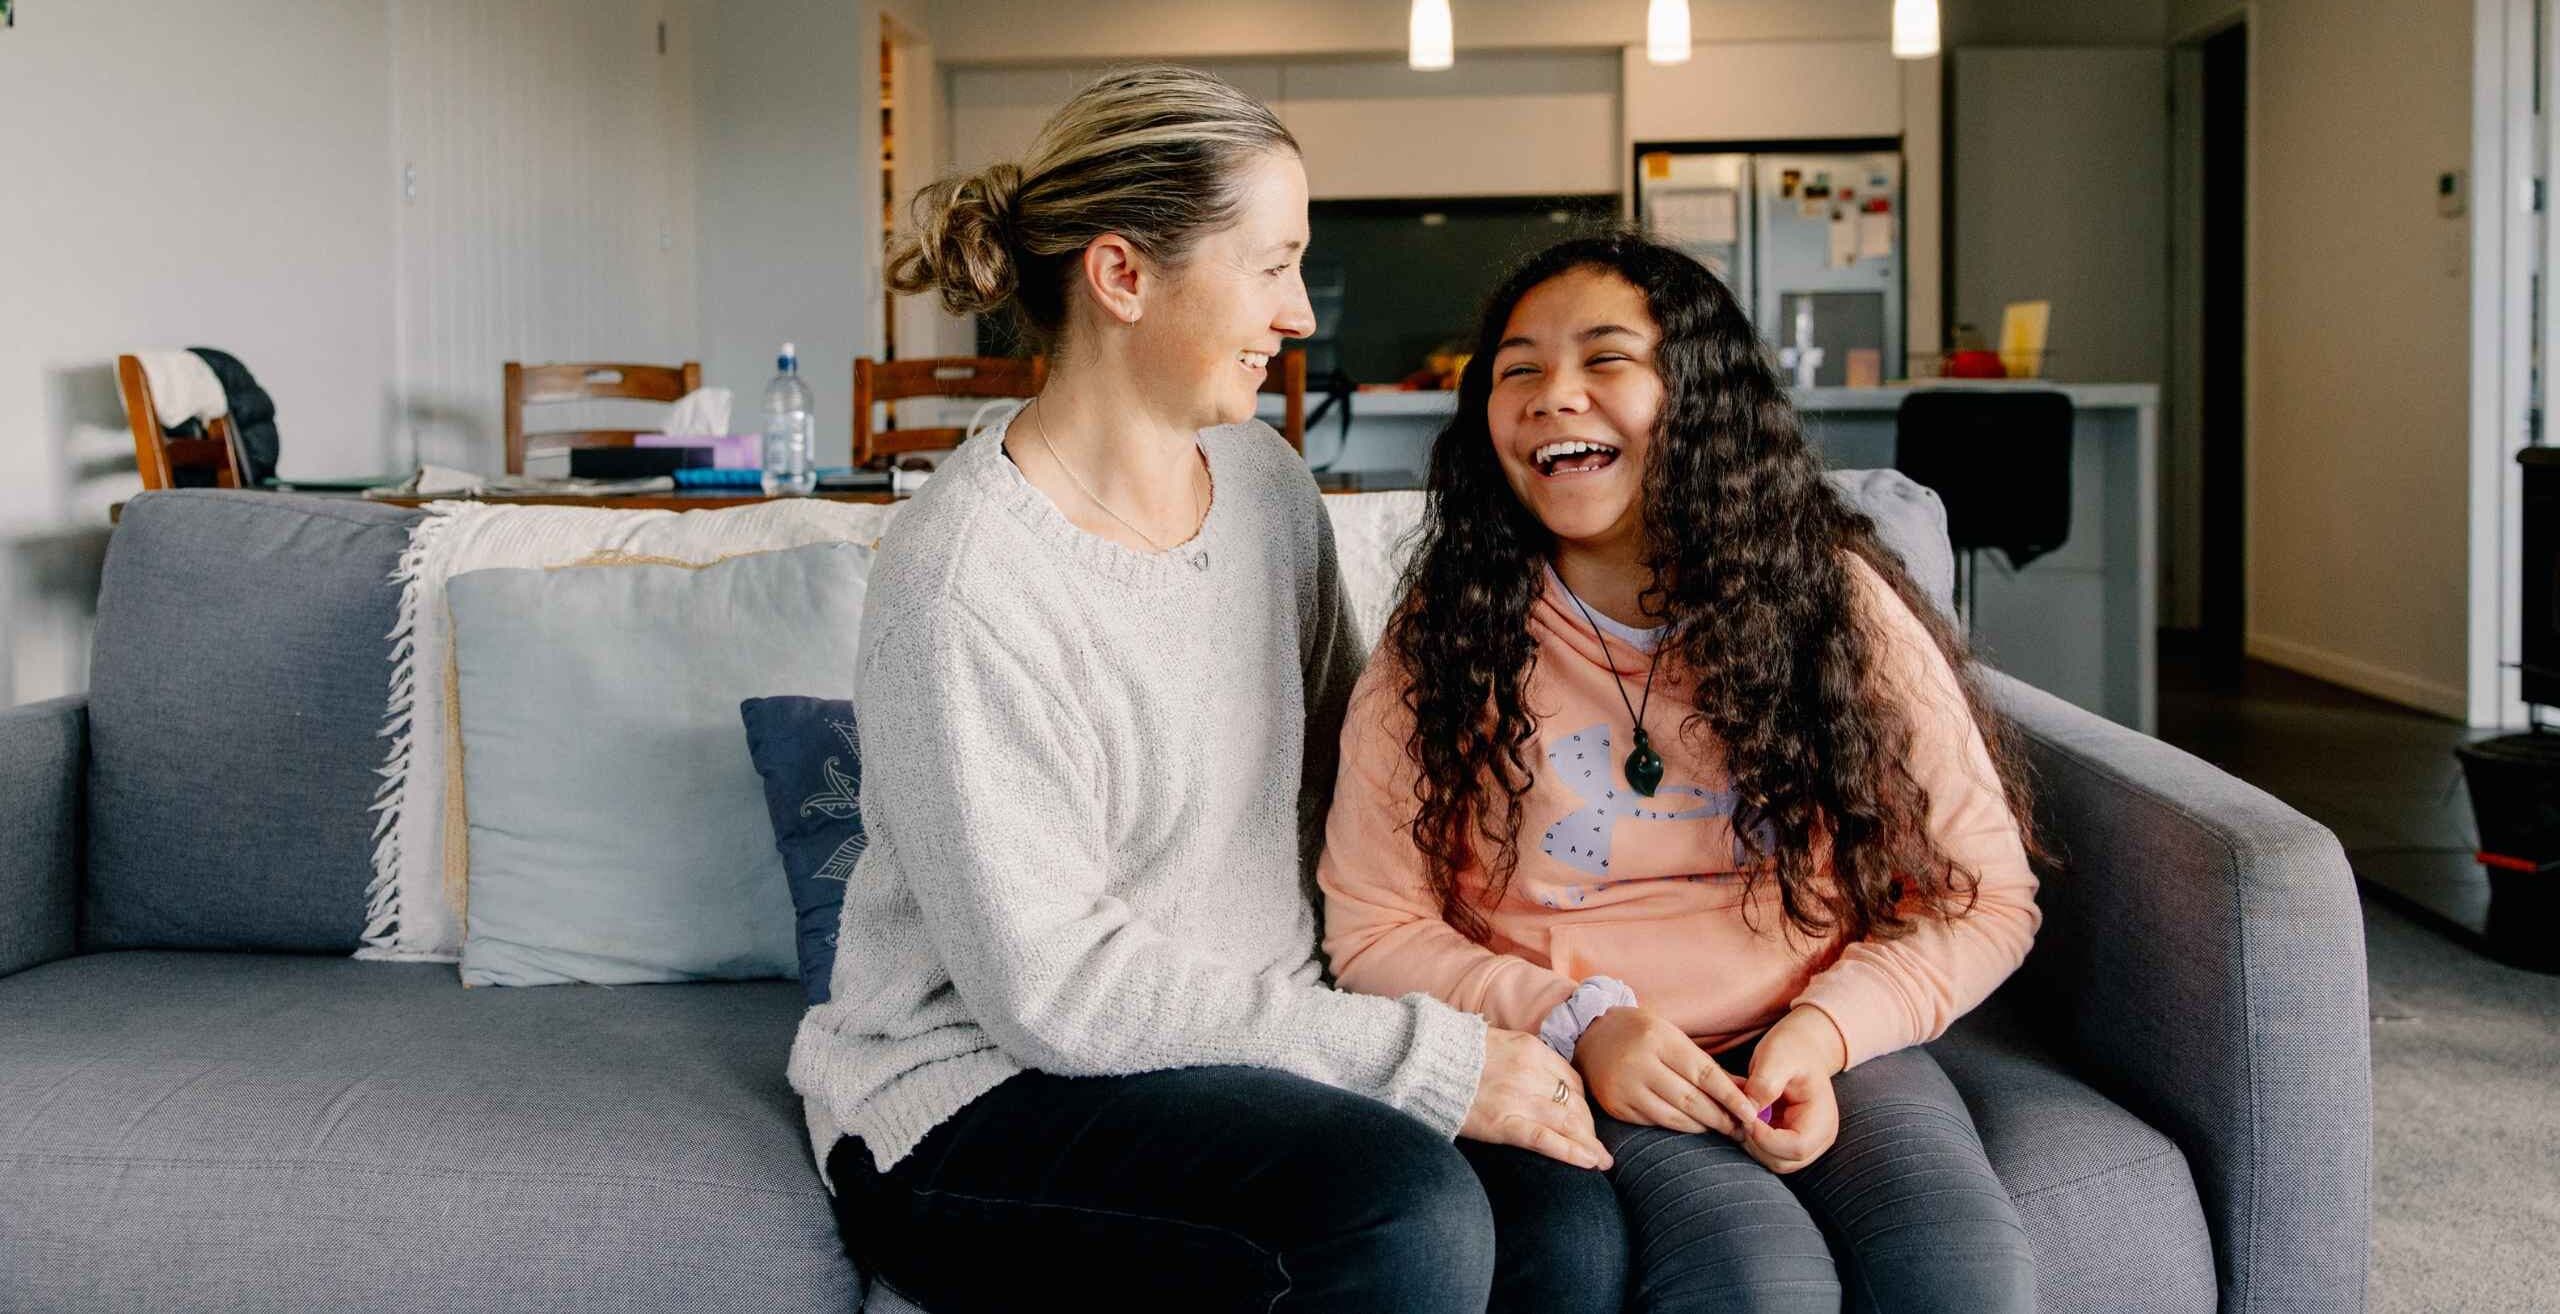 Marama and her mum sitting on a couch at home, laughing.